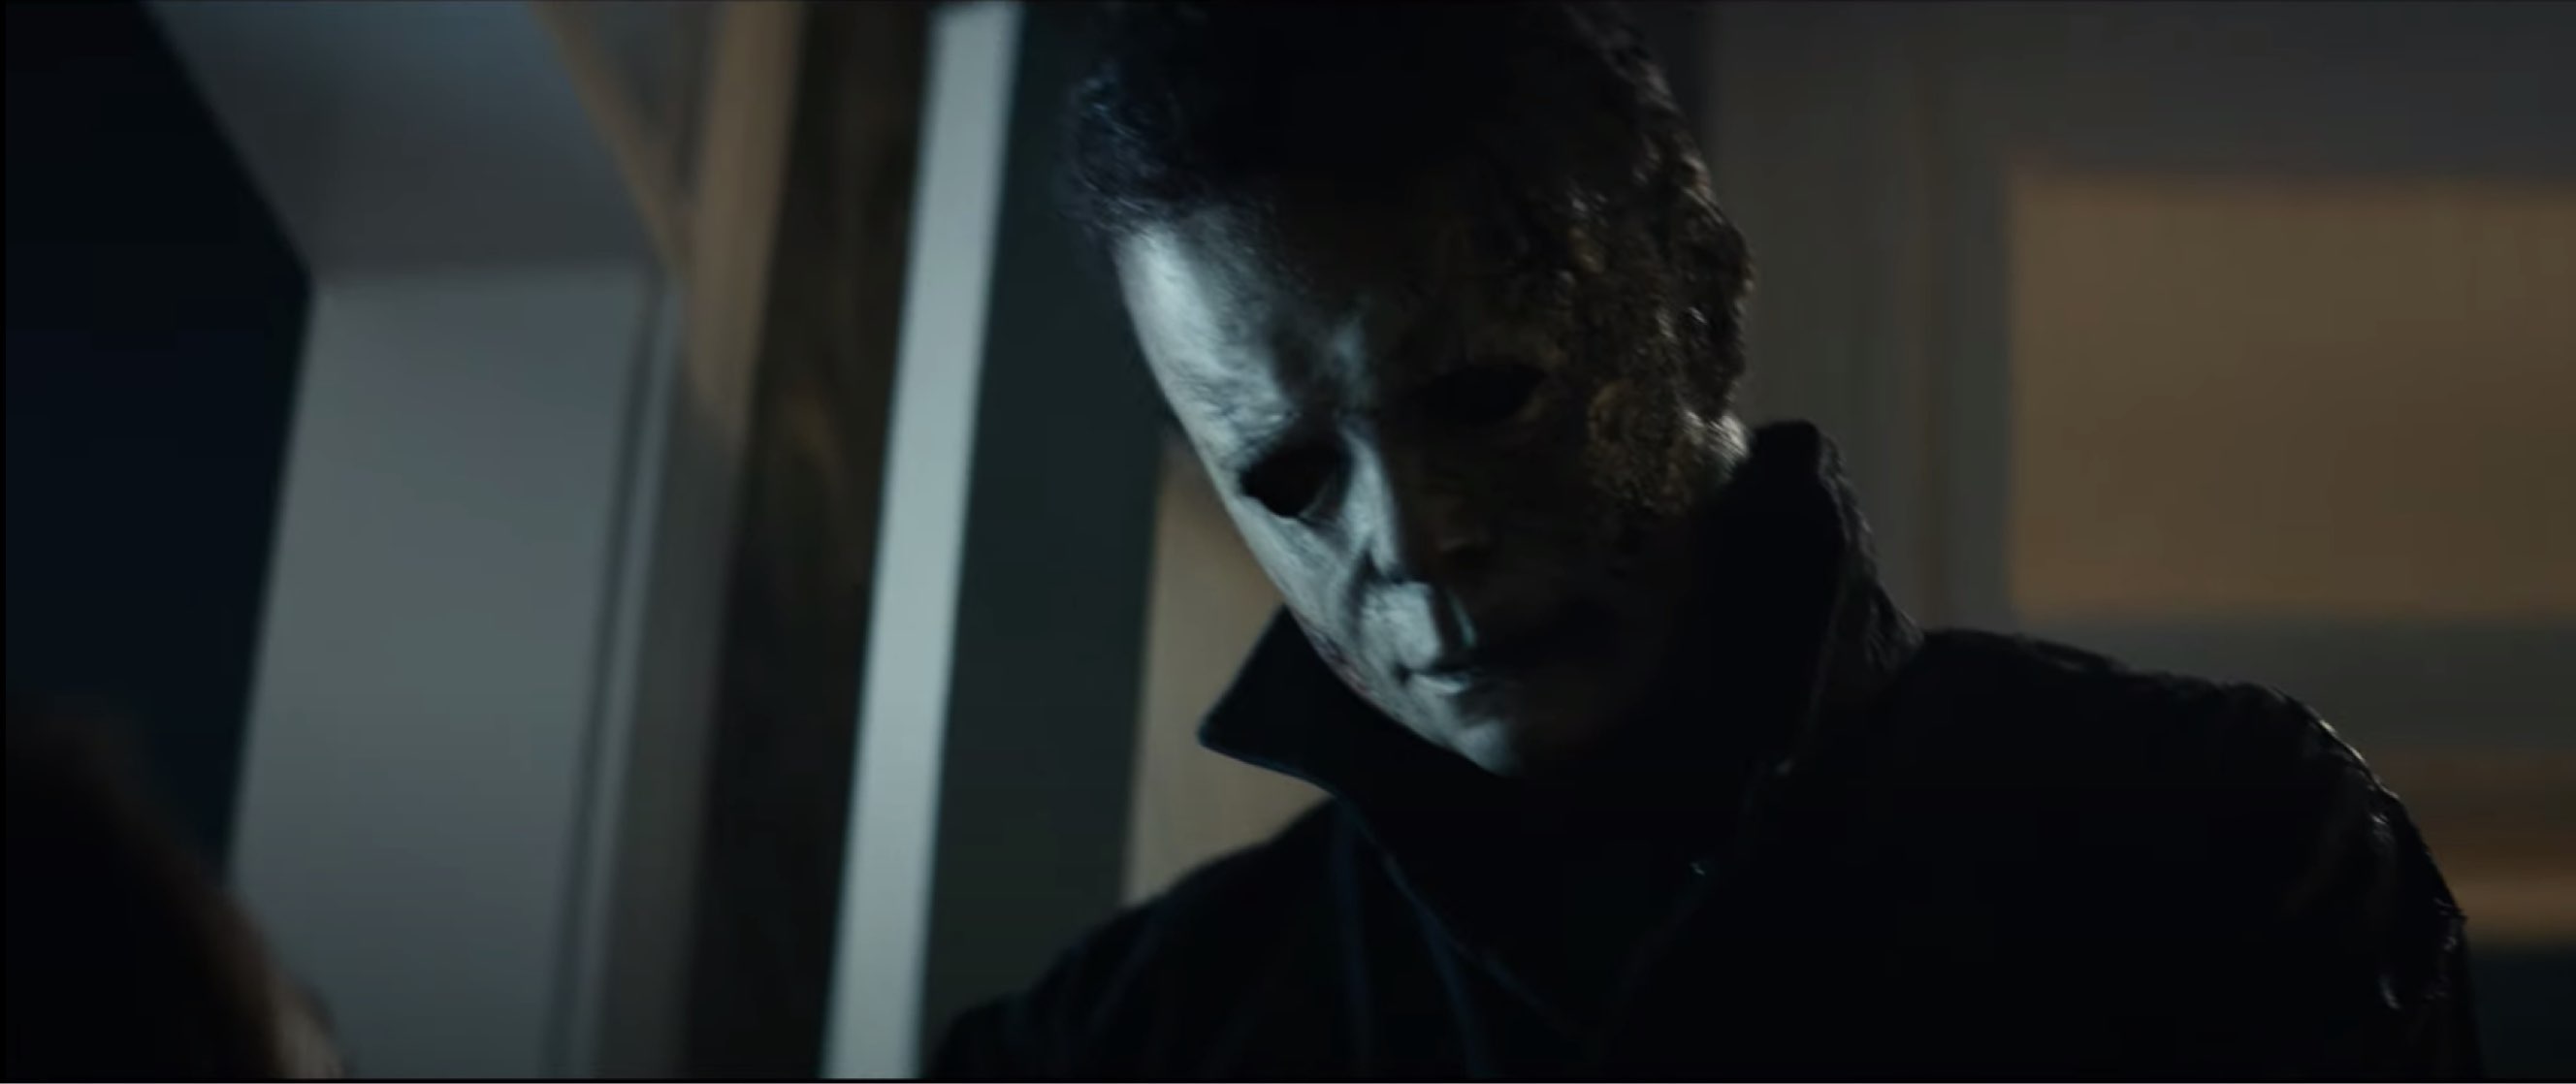 'Halloween Kills' Trailer Sees Laurie Strode Form a Mob to Take Down Michael Myers